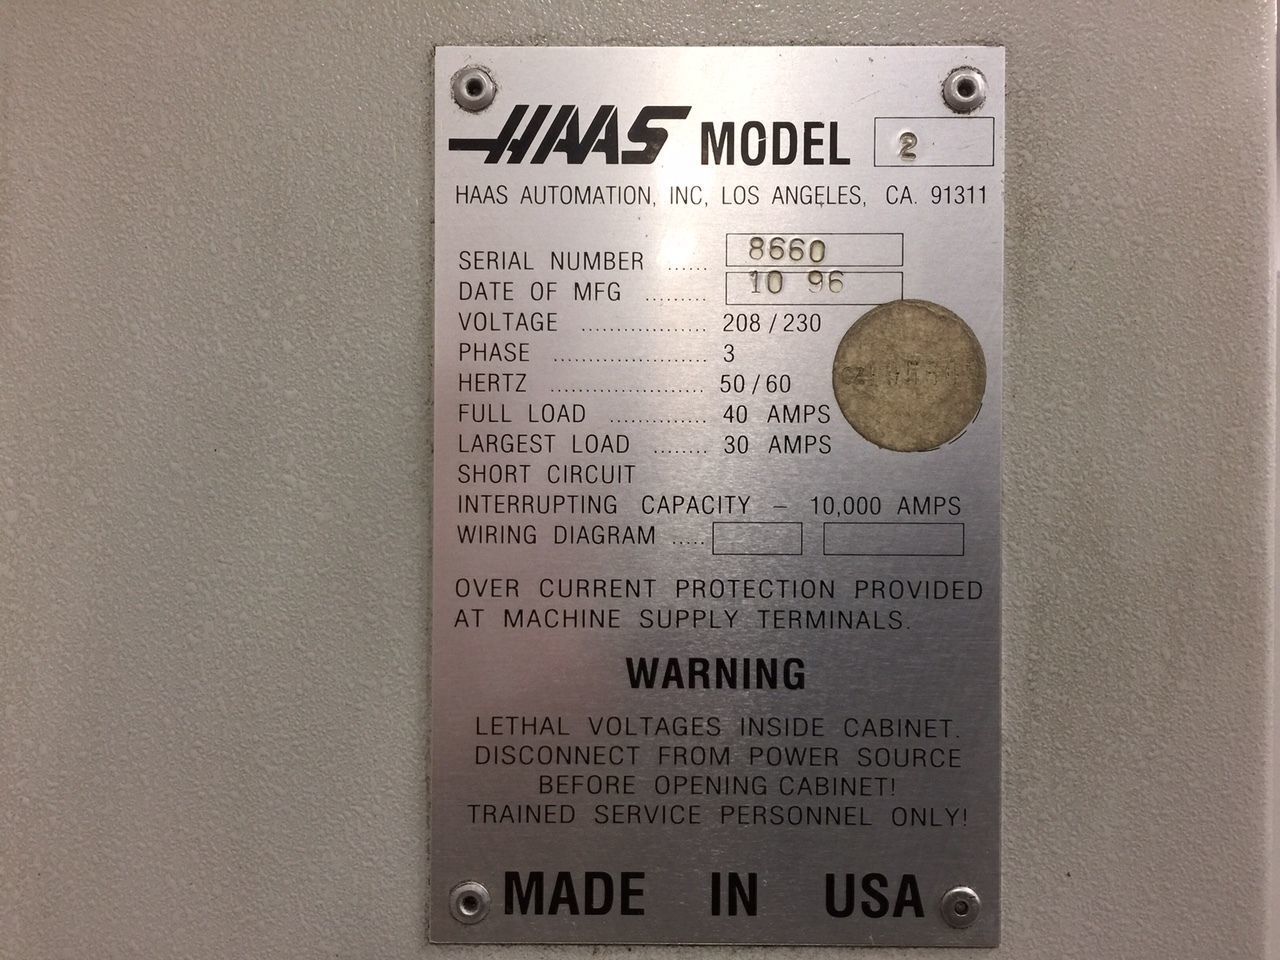 Haas VF-2 Vertical Machining Center For Sale